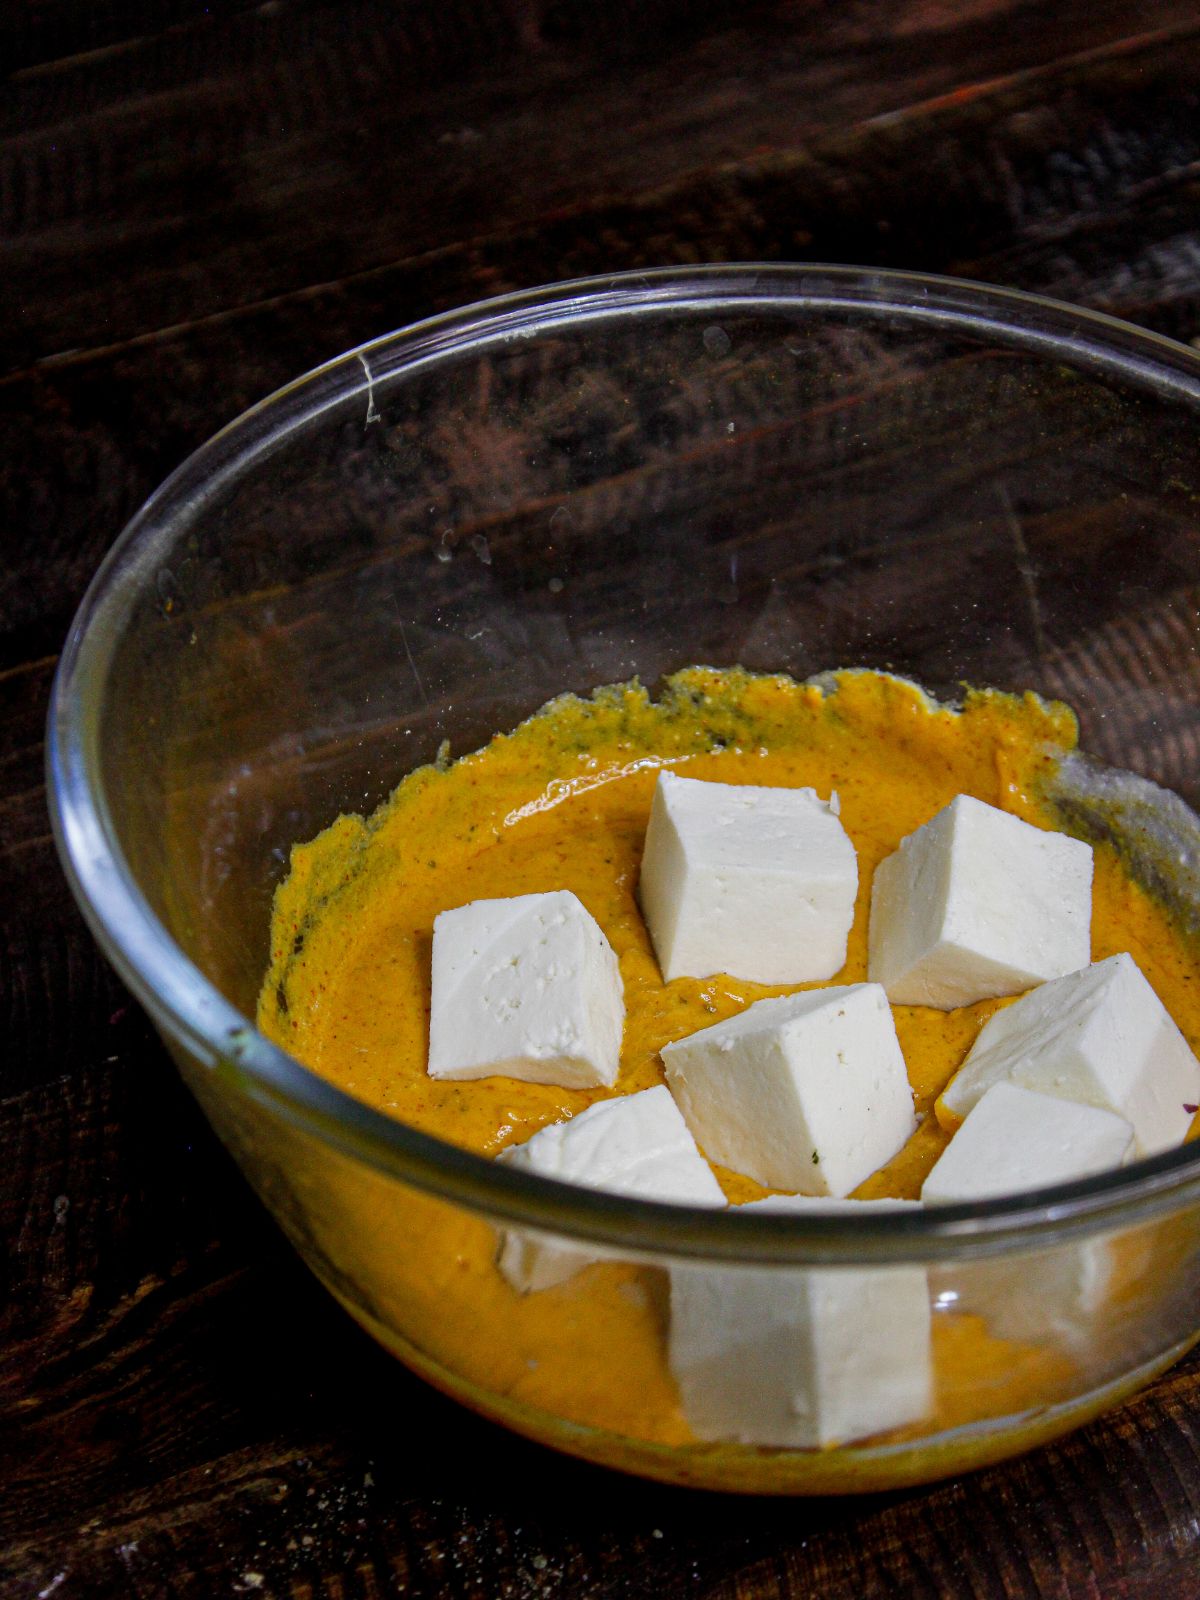 Add cottage cheese cubes into the mixture